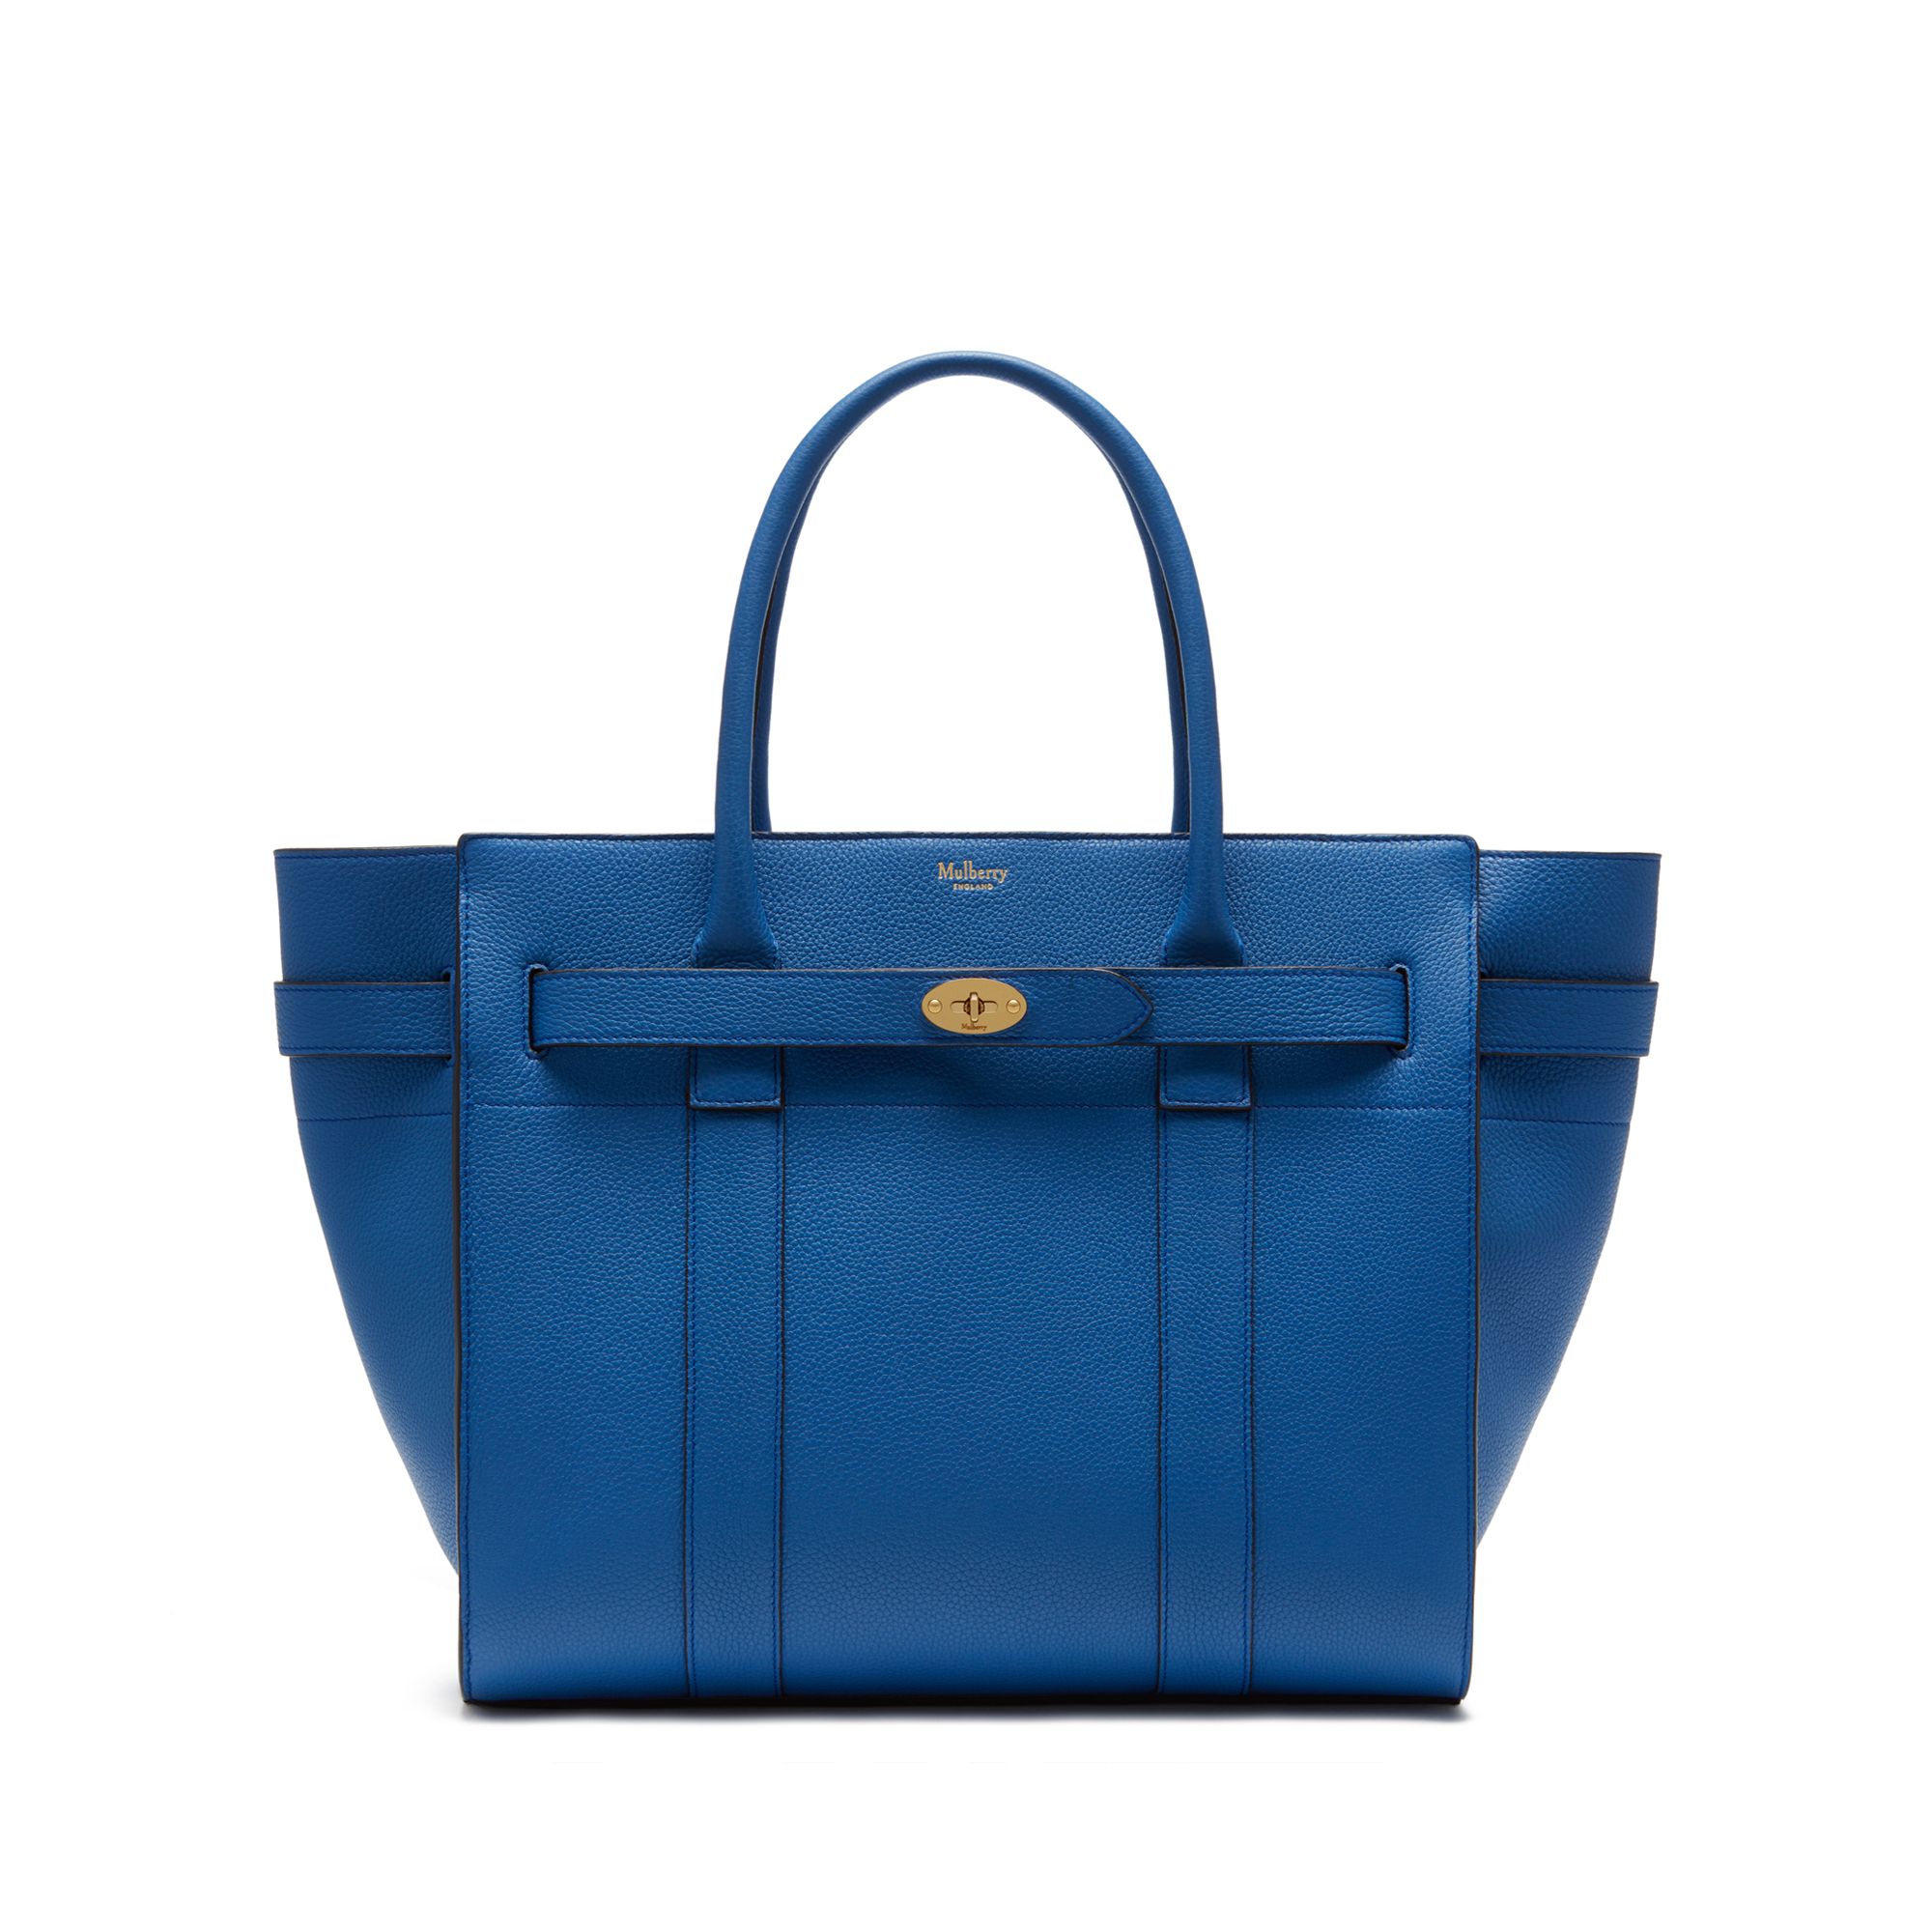 Mulberry Zipped Bayswater in Porcelain Blue - Meghan's Mirror